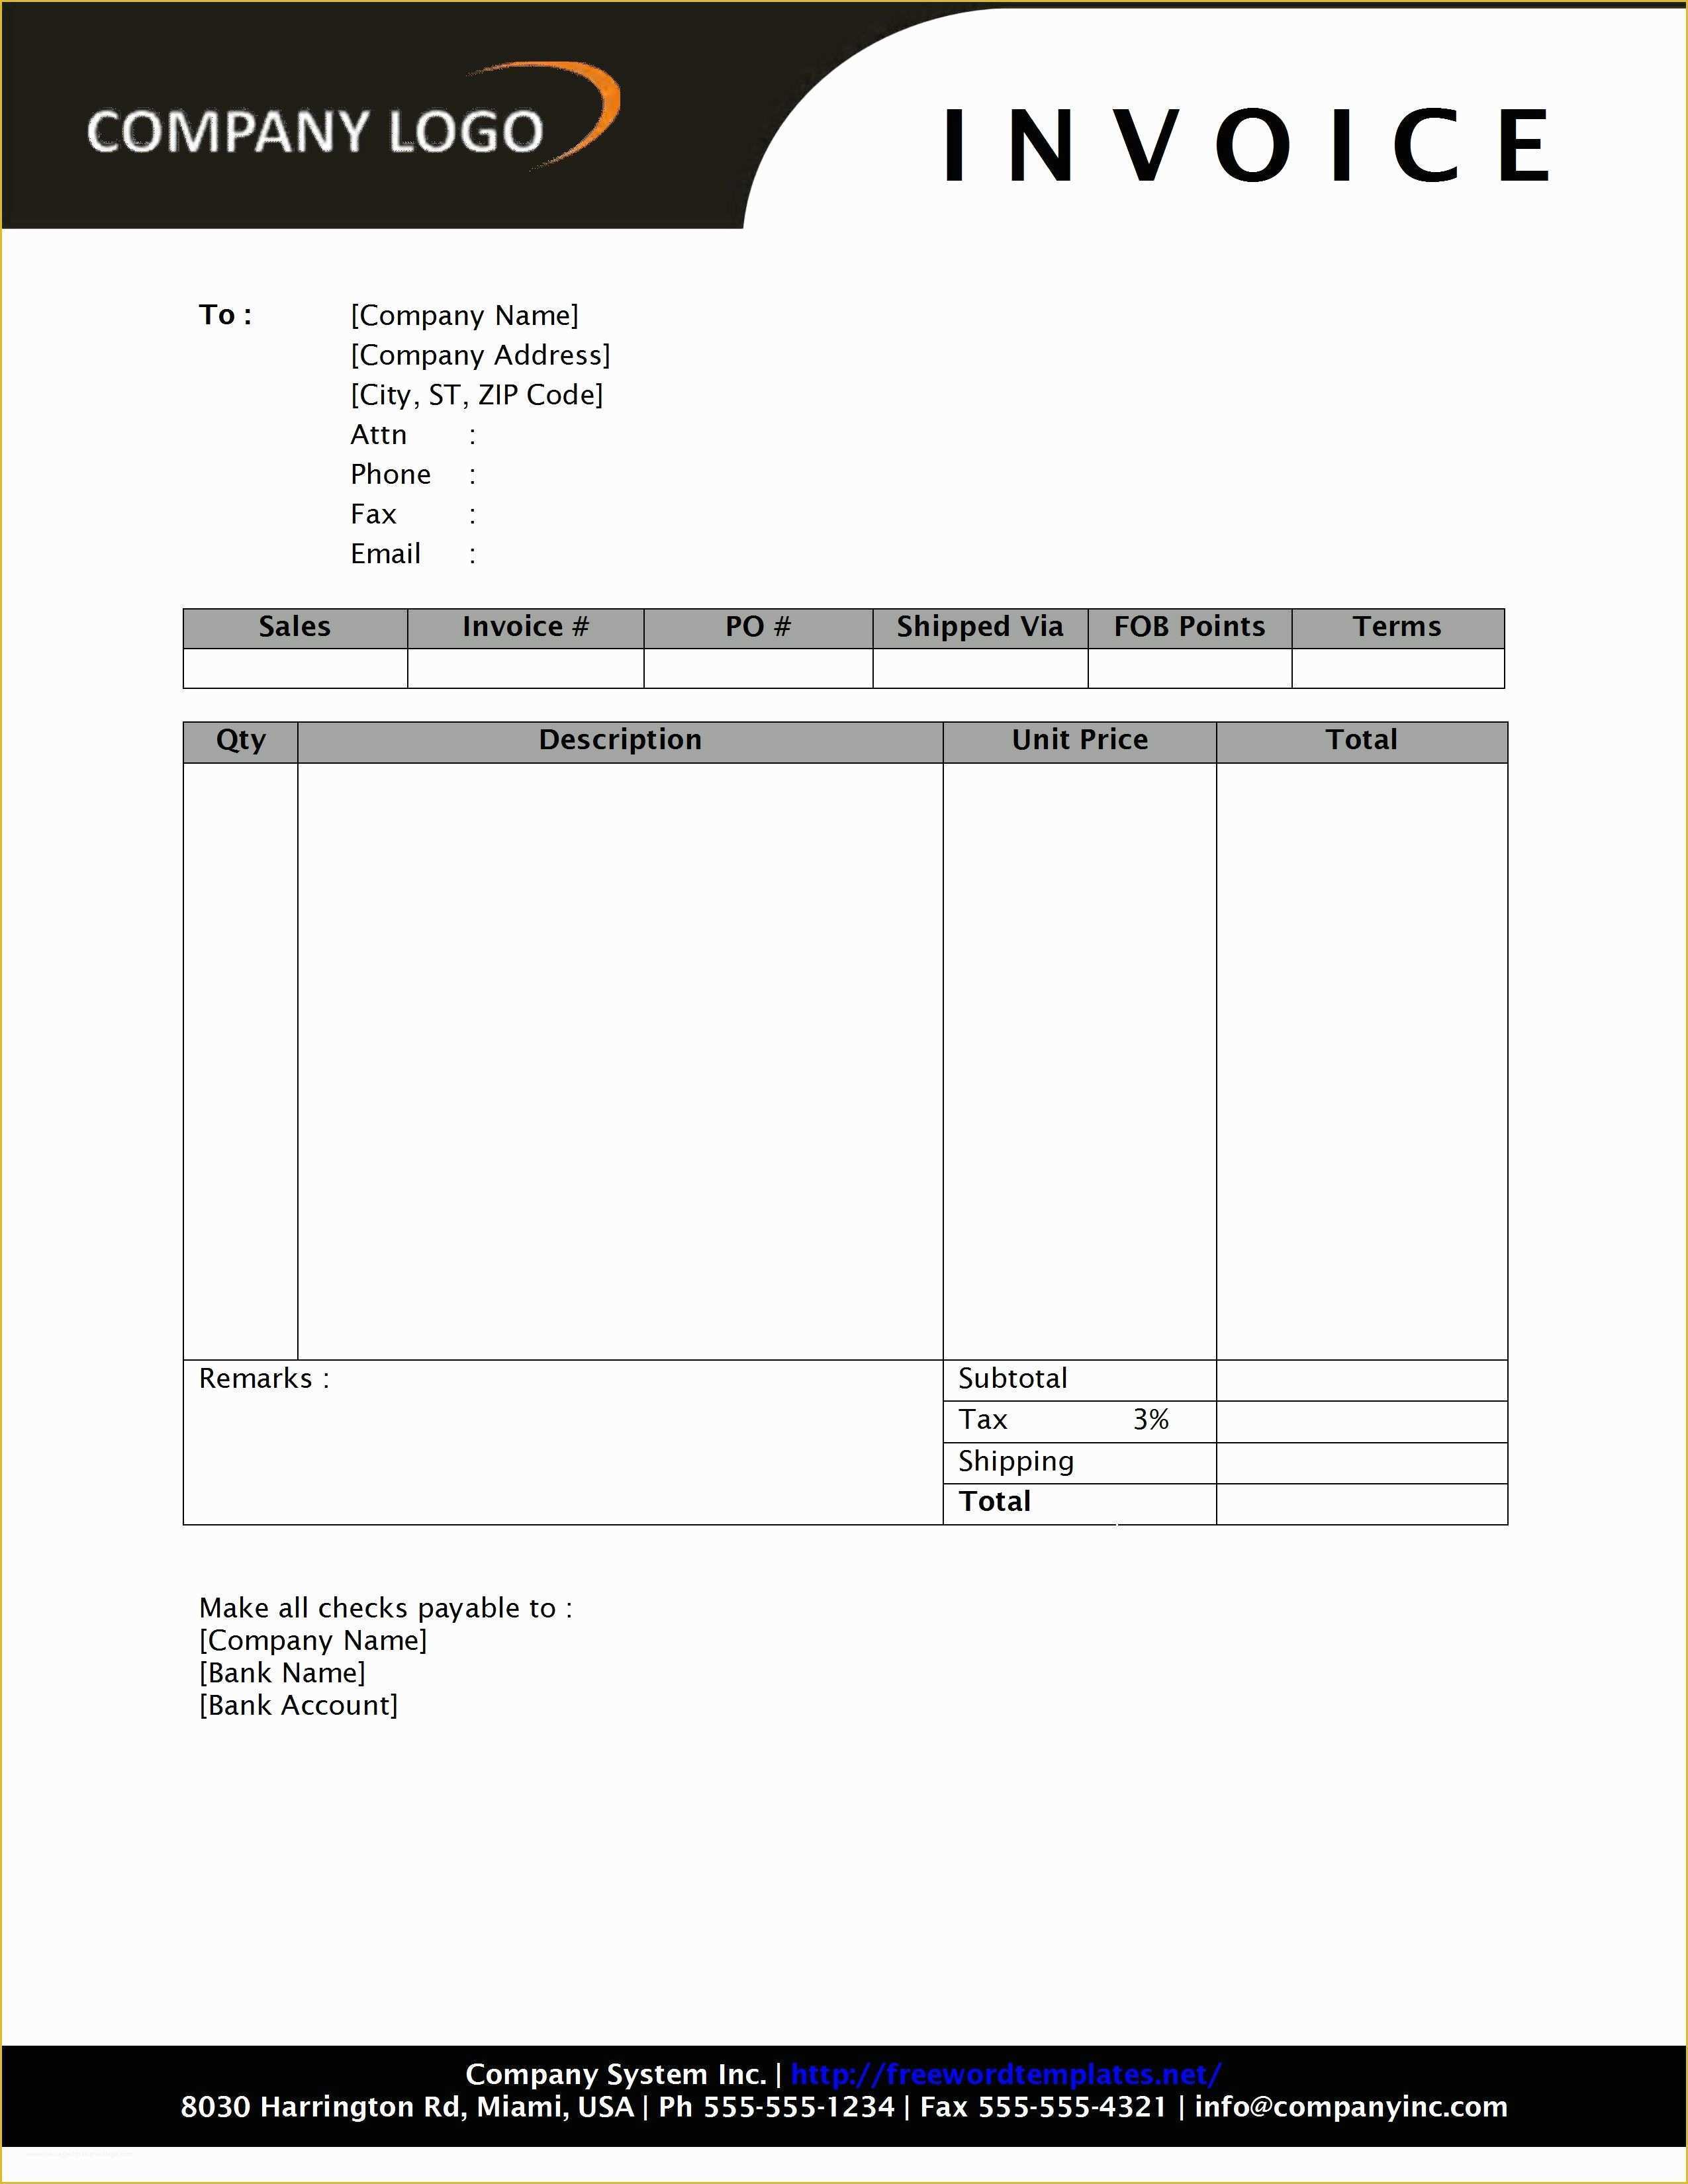 Microsoft Word Invoice Template Free Of General Sales Invoice